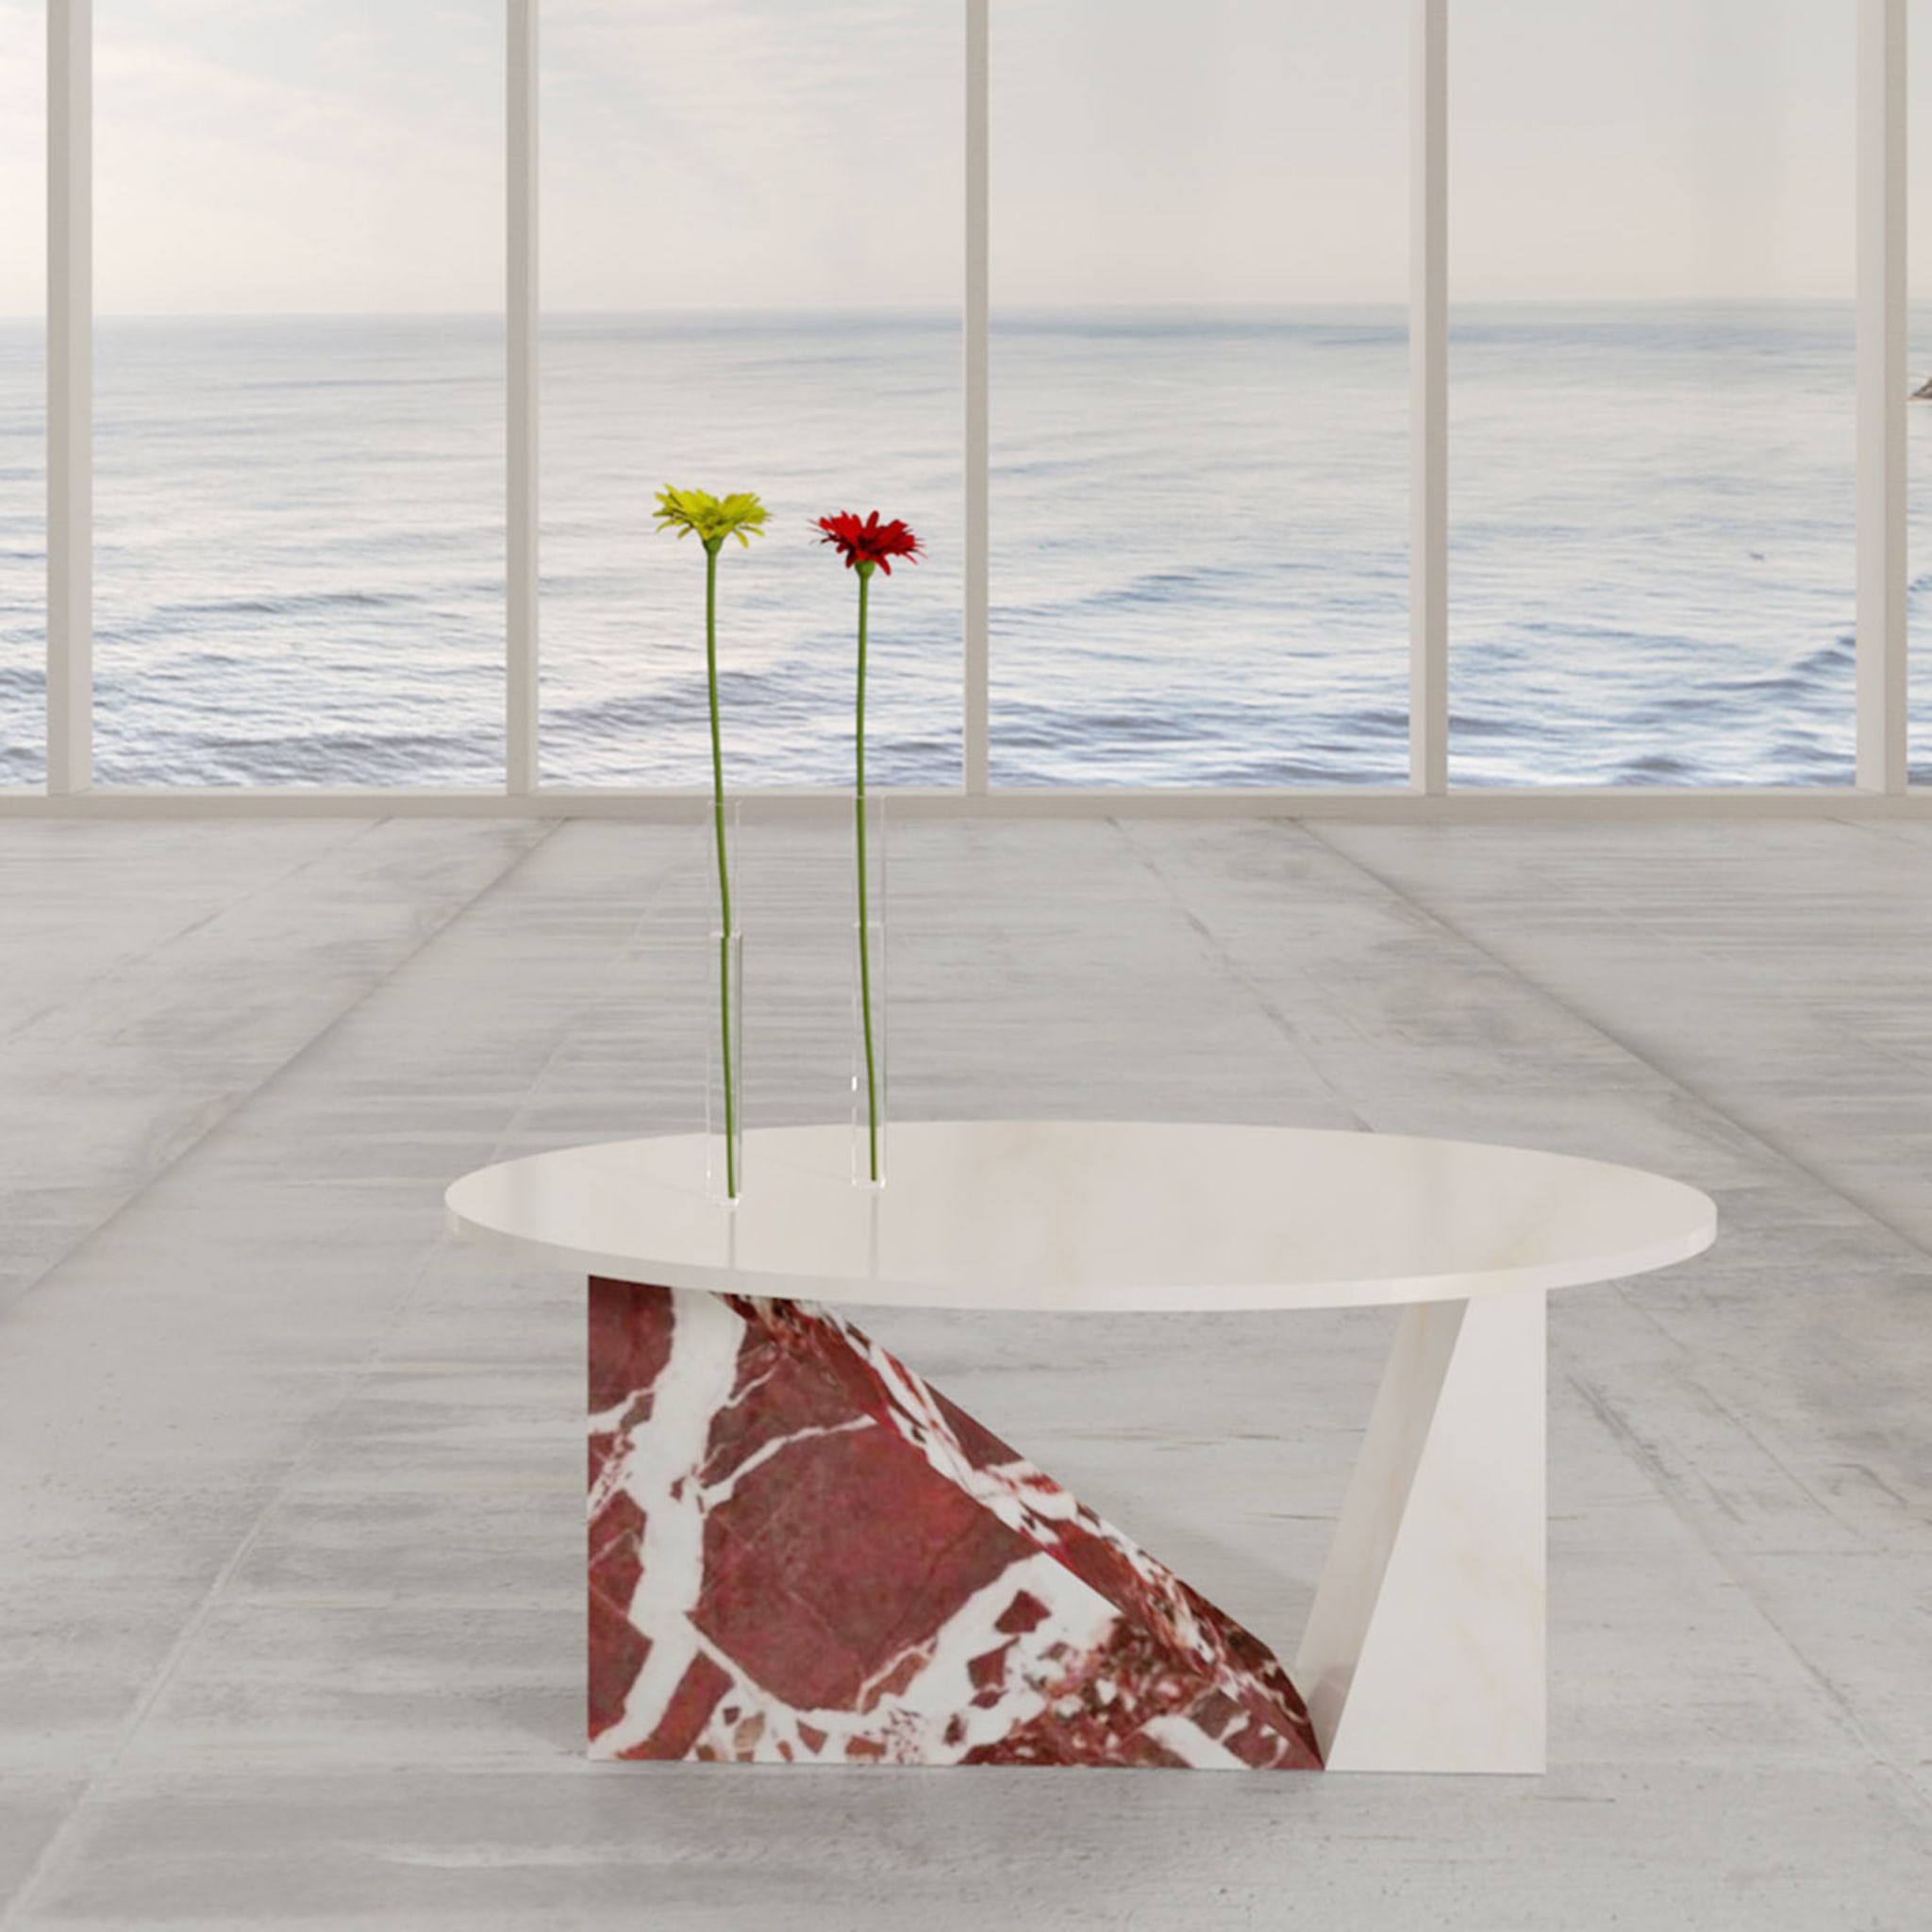 Dieus Coffee Table in Gold Calacatta and Red Levanto Marbles by sid&sign - Alternative view 2